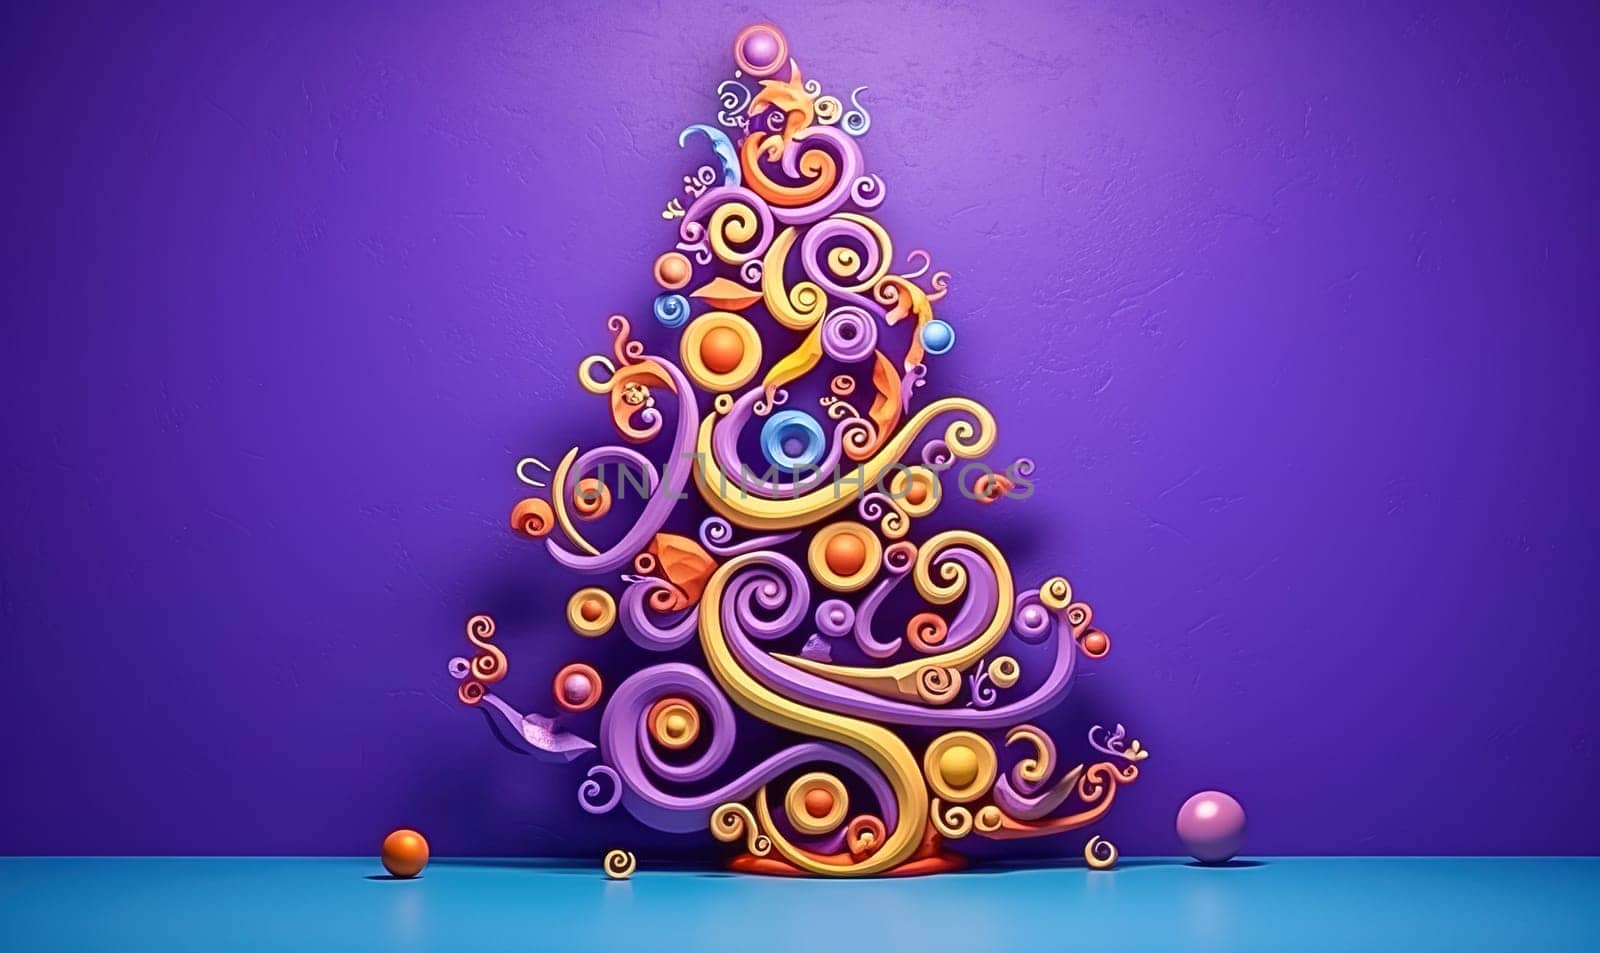 Illustration of 3d Christmas tree on purple and pink background. High quality illustration